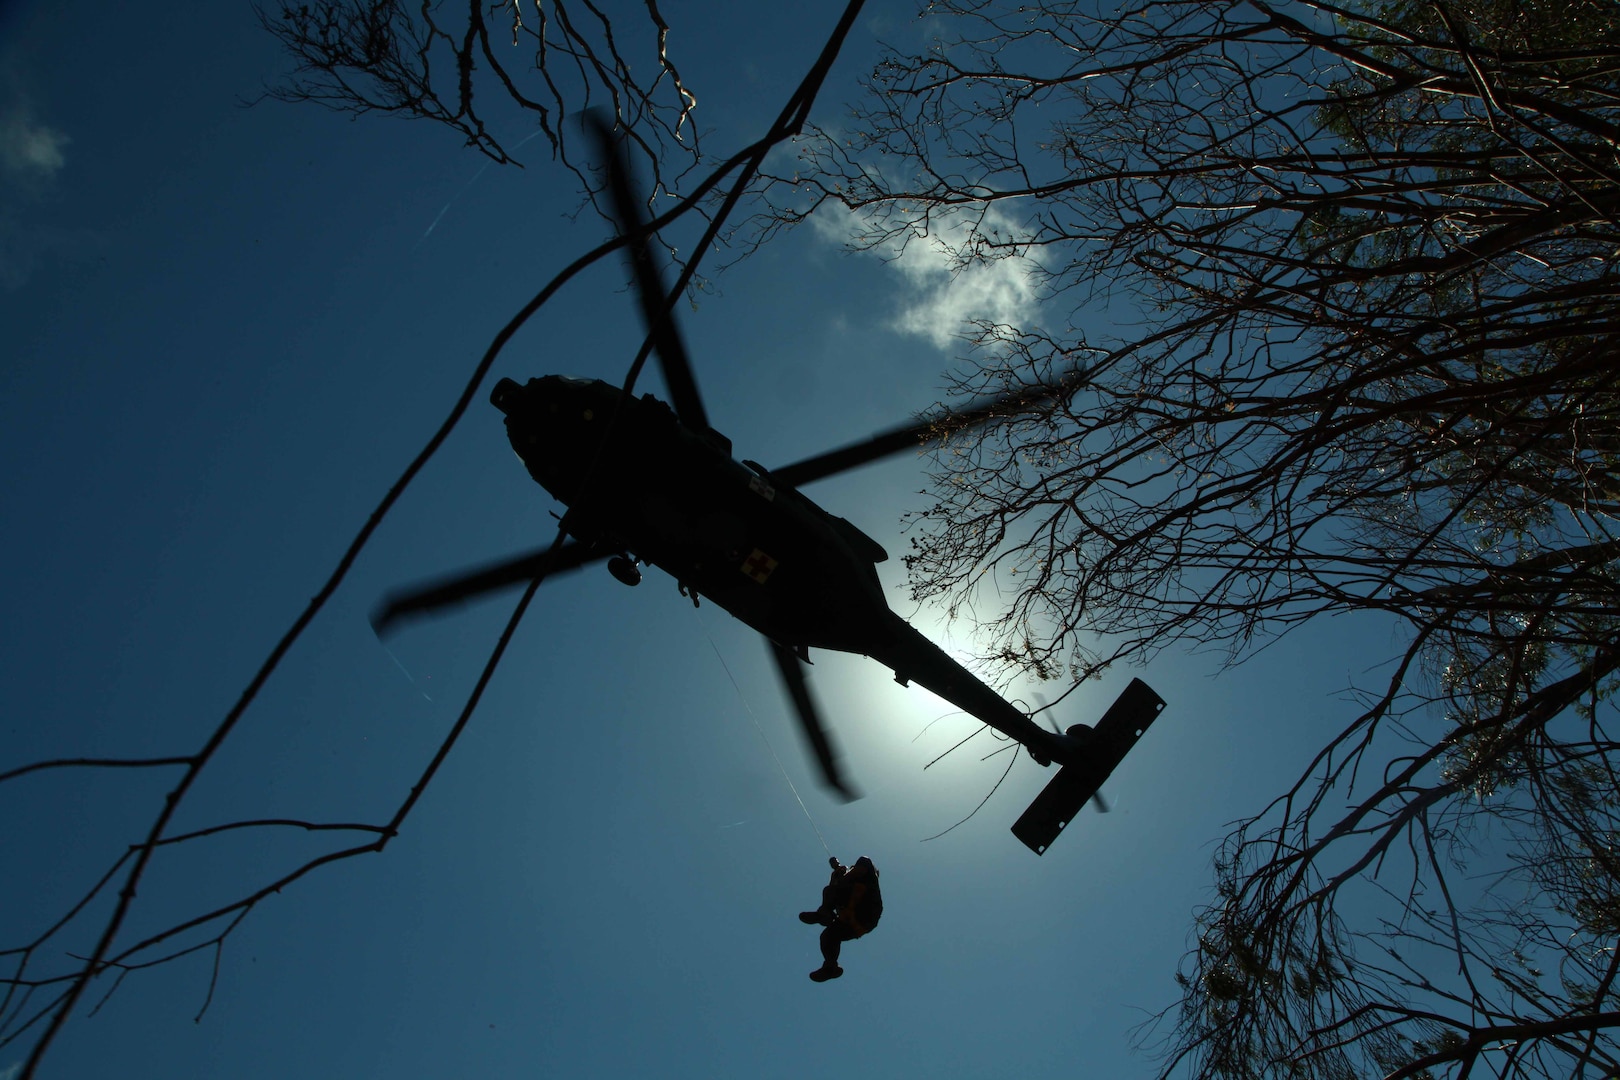 A 25th Combat Action Brigade (CAB) UH - 60 (black-hawk) conducts jungle penetration operations via air lift for a Defense POW/MIA Accounting Agency (DPAA) personnel on Sept. 27, 2016 in the Kualua Mountains of Oahu, HI. The 25th CAB conducted the jungle penetration in support of a Government operation on U.S. soil called 16-1US who's soul purpose is to locate a U.S. Navy pilot who went missing over 70 years ago. 